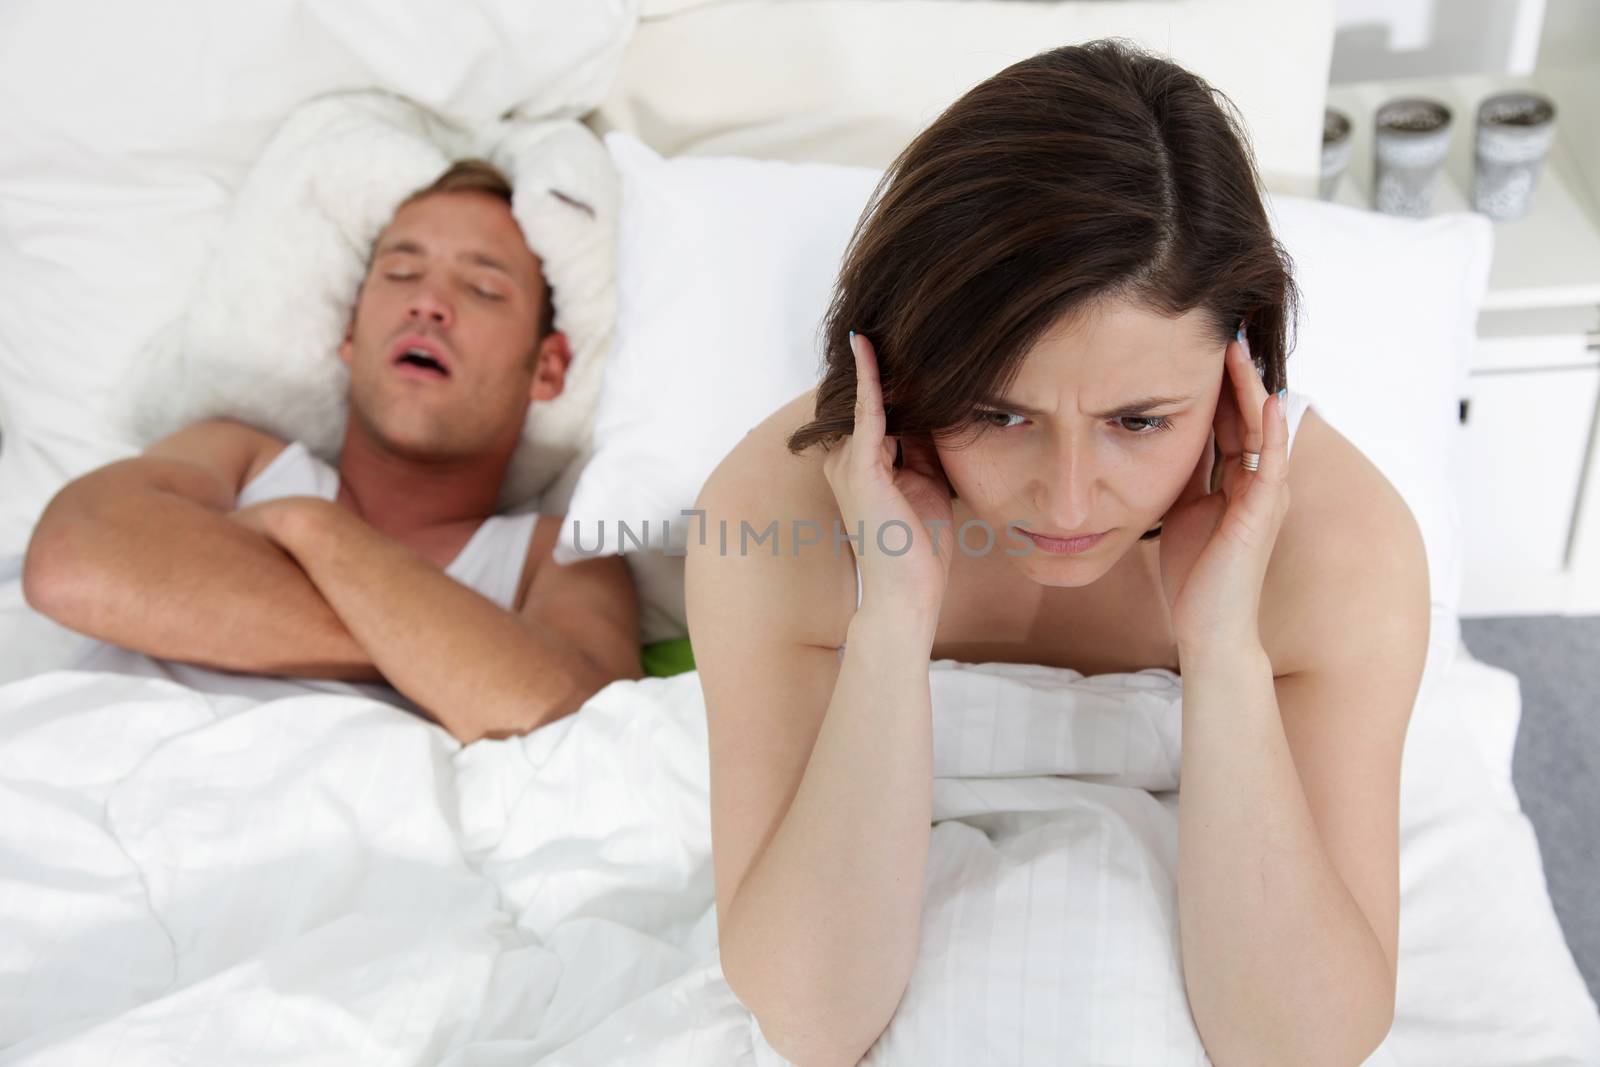 Marital problems in the bed with a woman suffering from insomnia trying to block her ears against her husbands loud snores